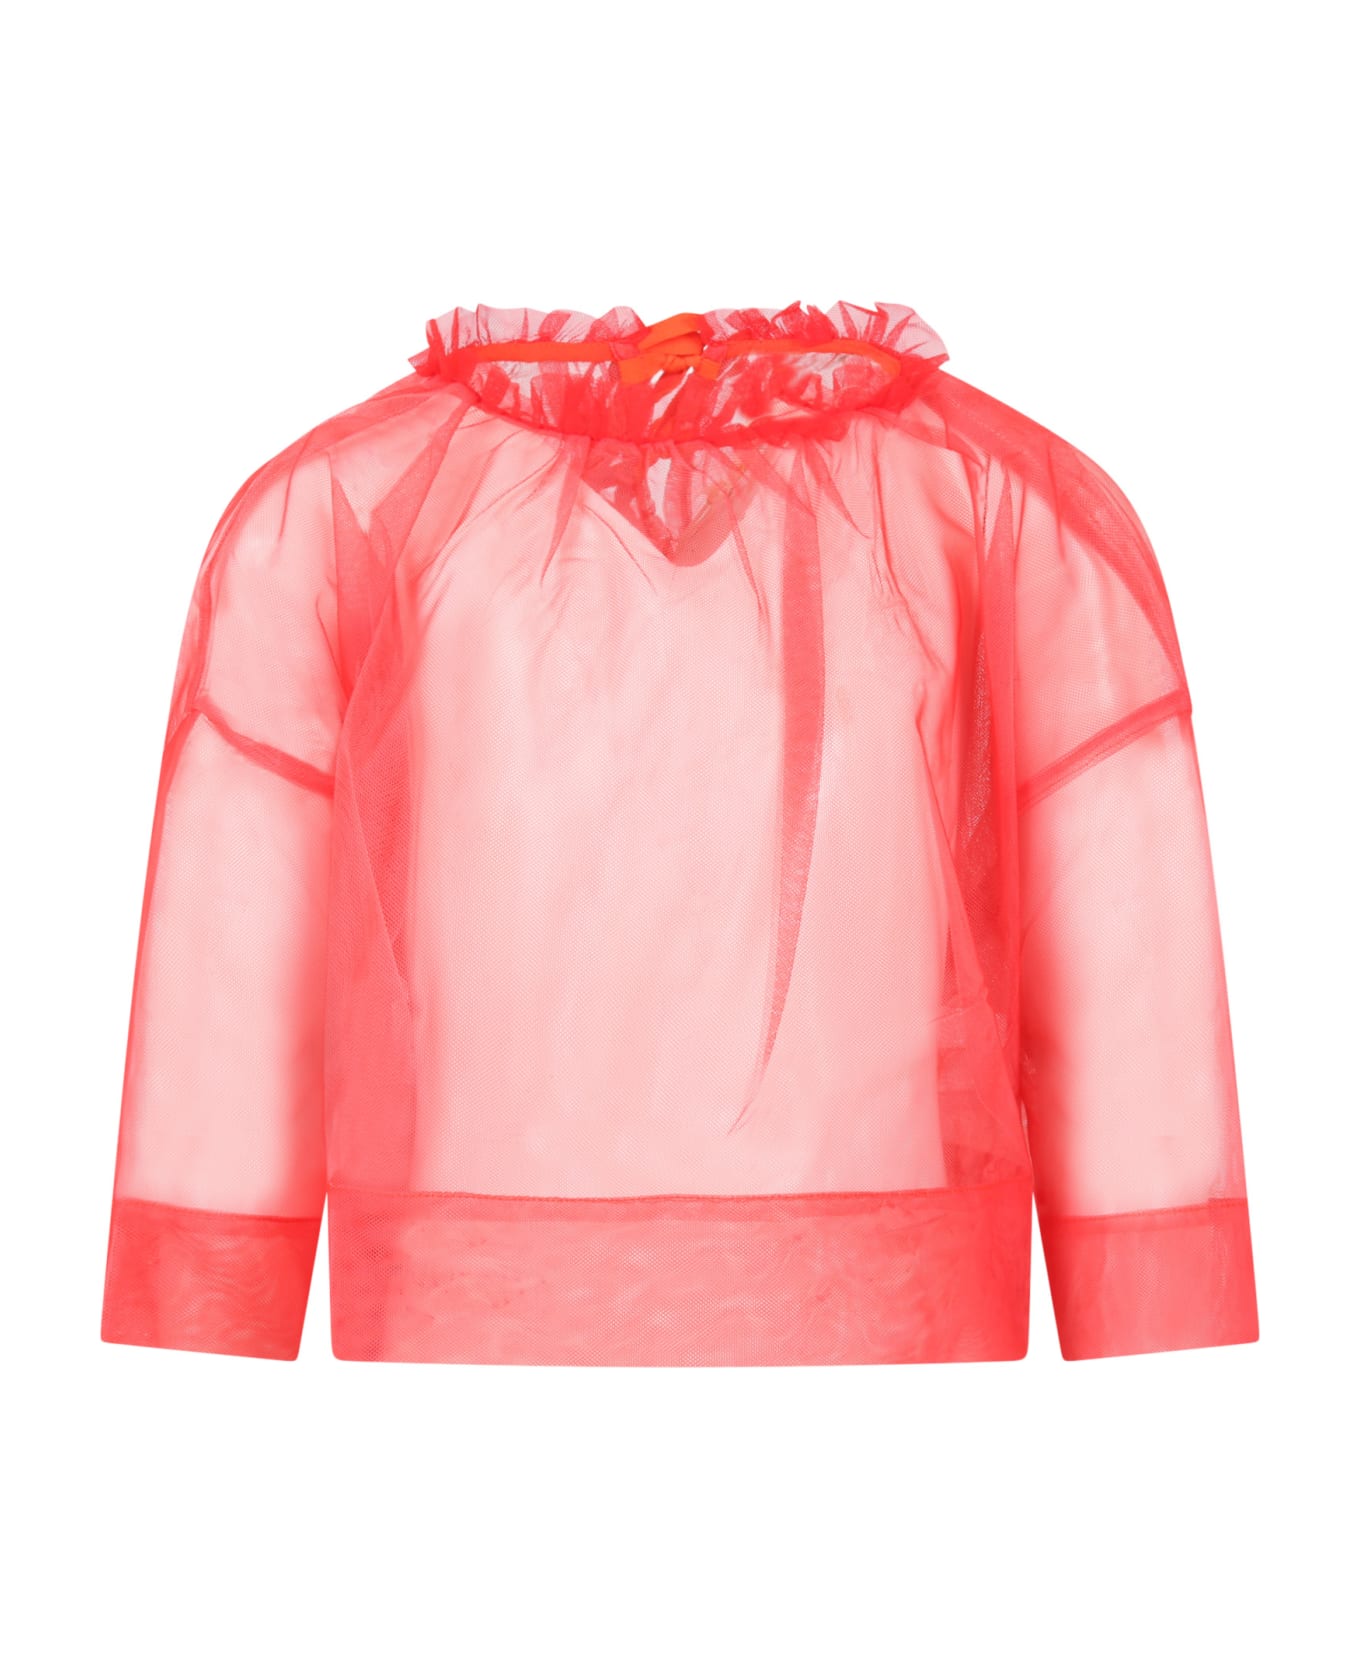 Tia Cibani Red Blouse For Girl - Red